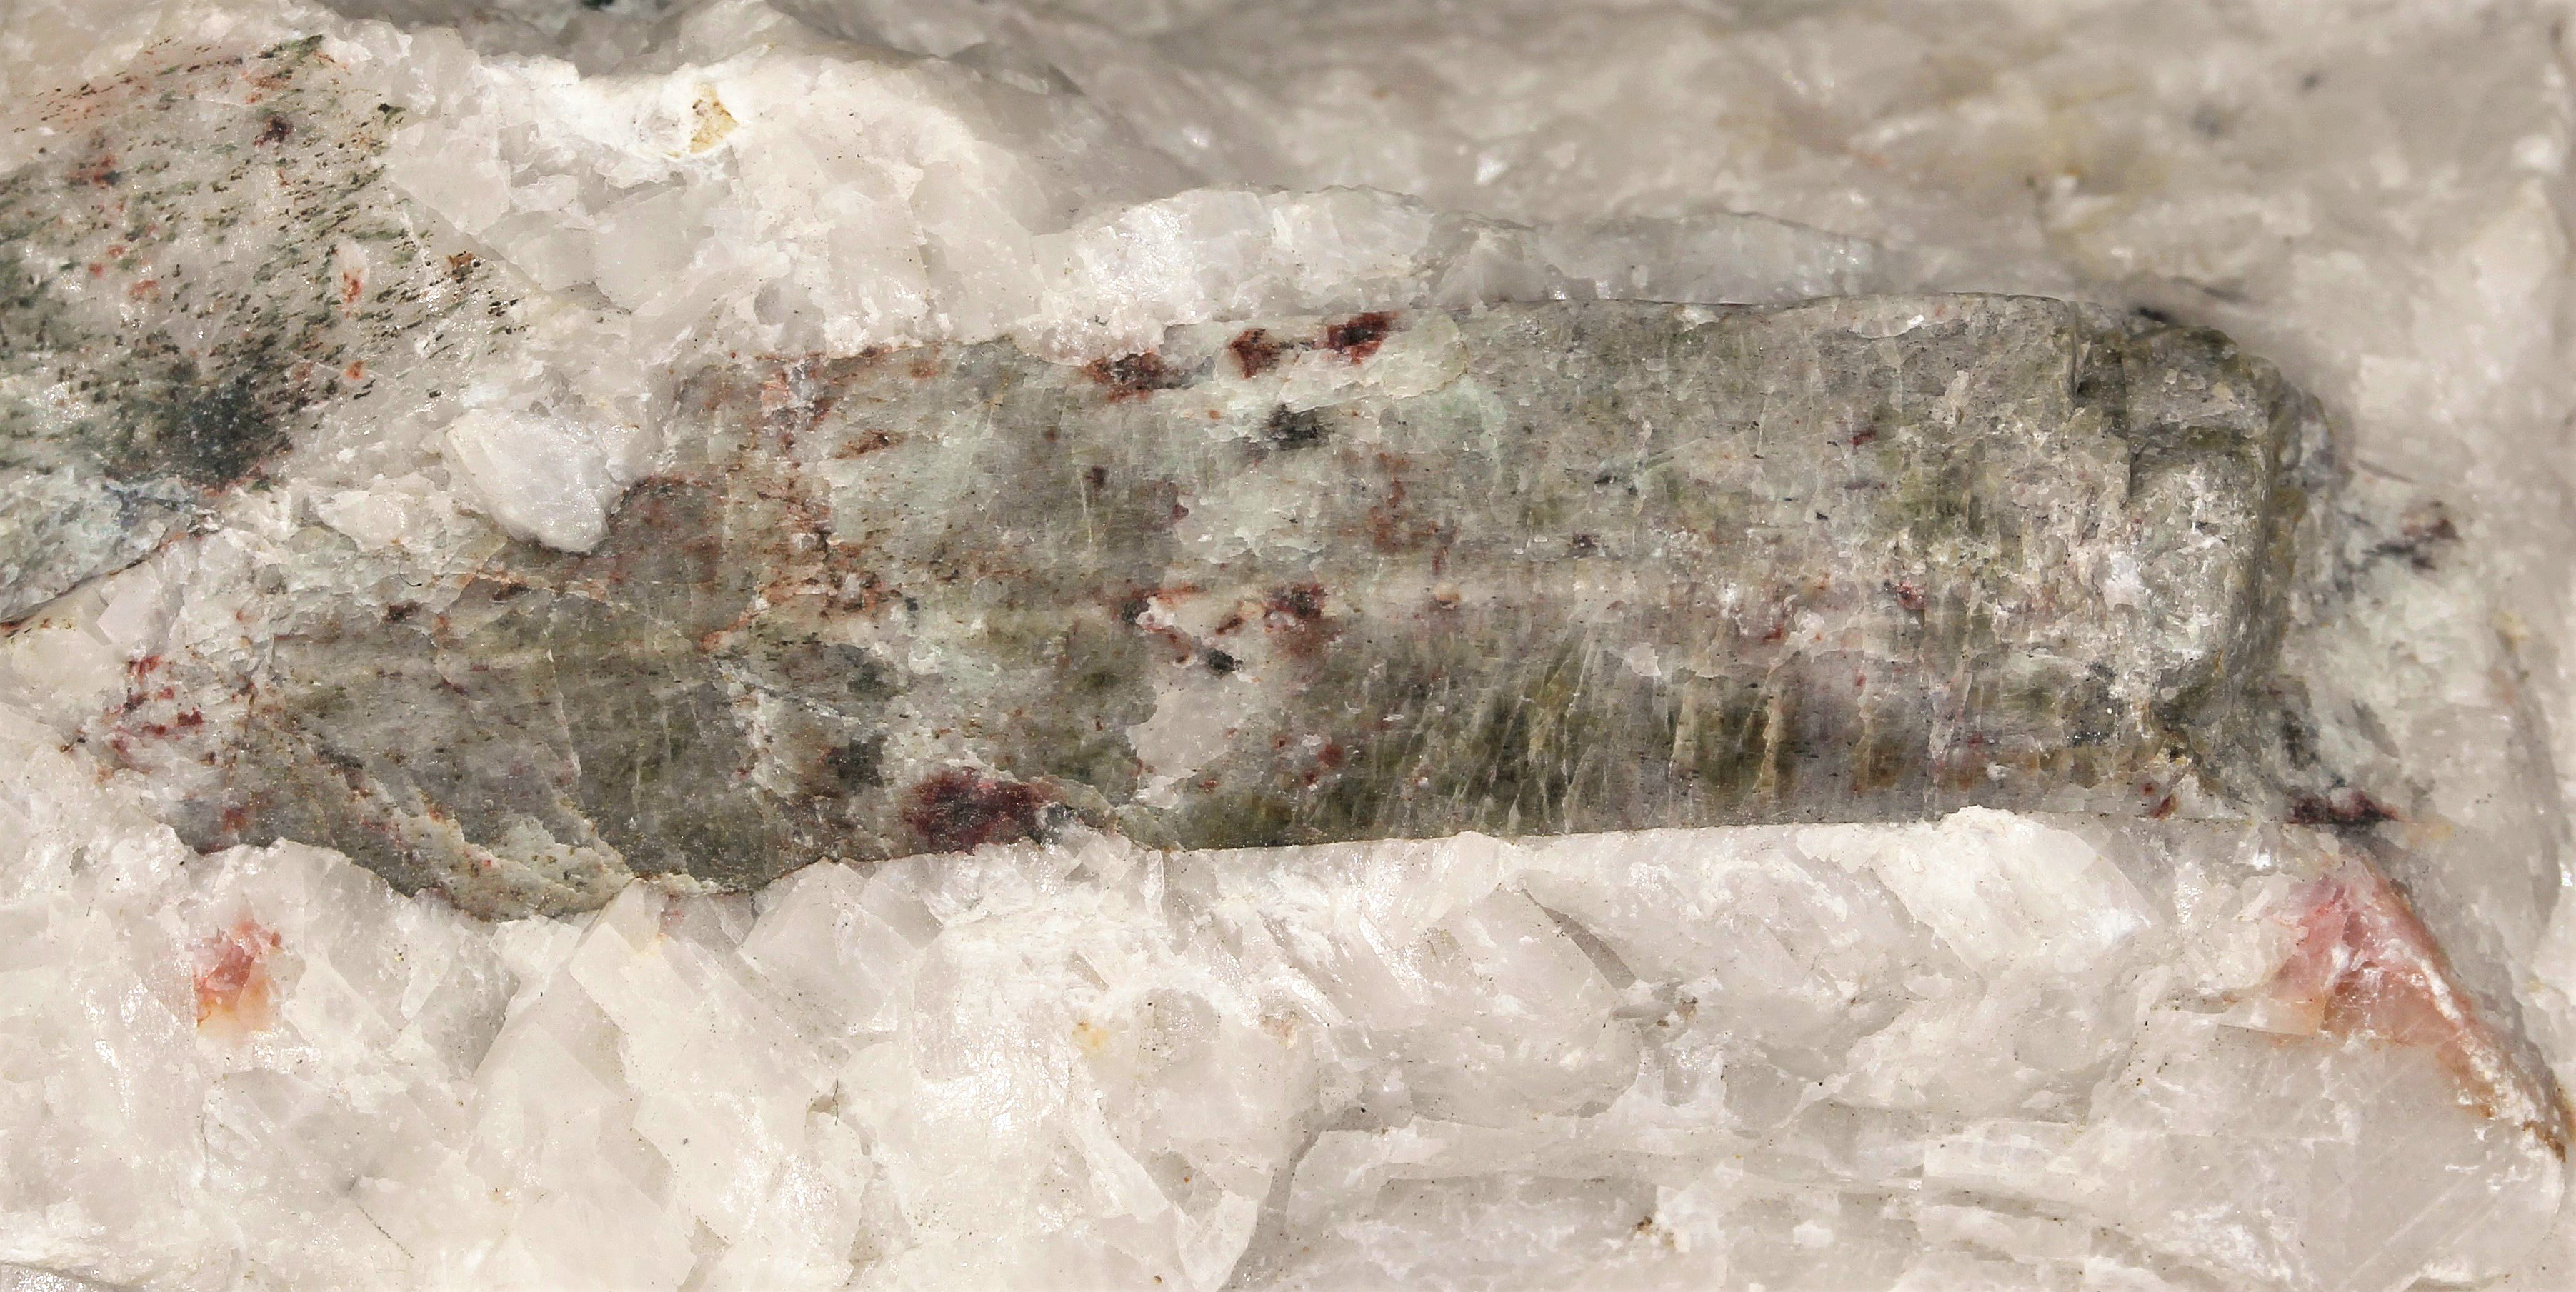 Fluorapatite crystal on calcite from the Sterling Hill Mine, NJ